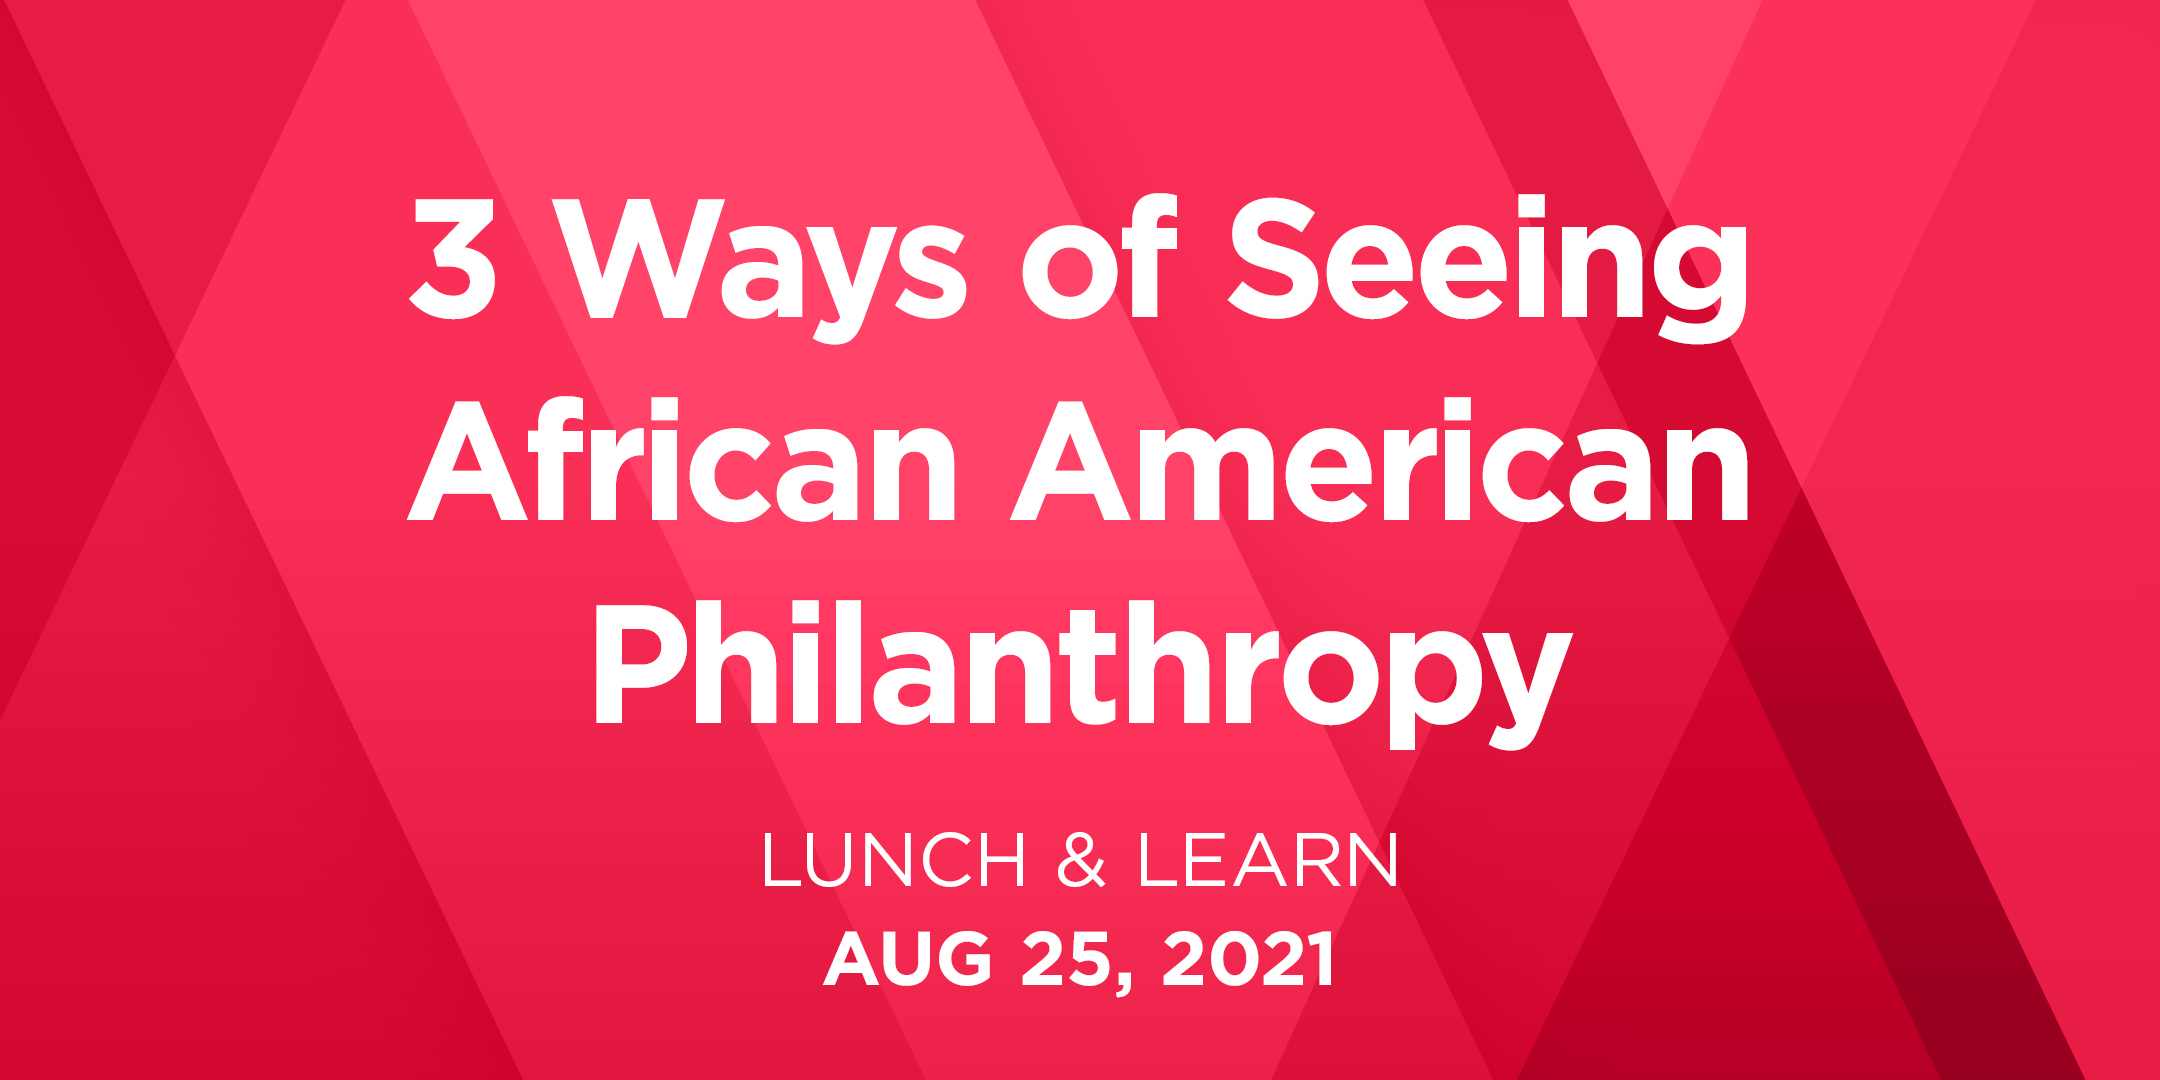 Lunch & Learn: Three Ways of Seeing African American Philanthropy